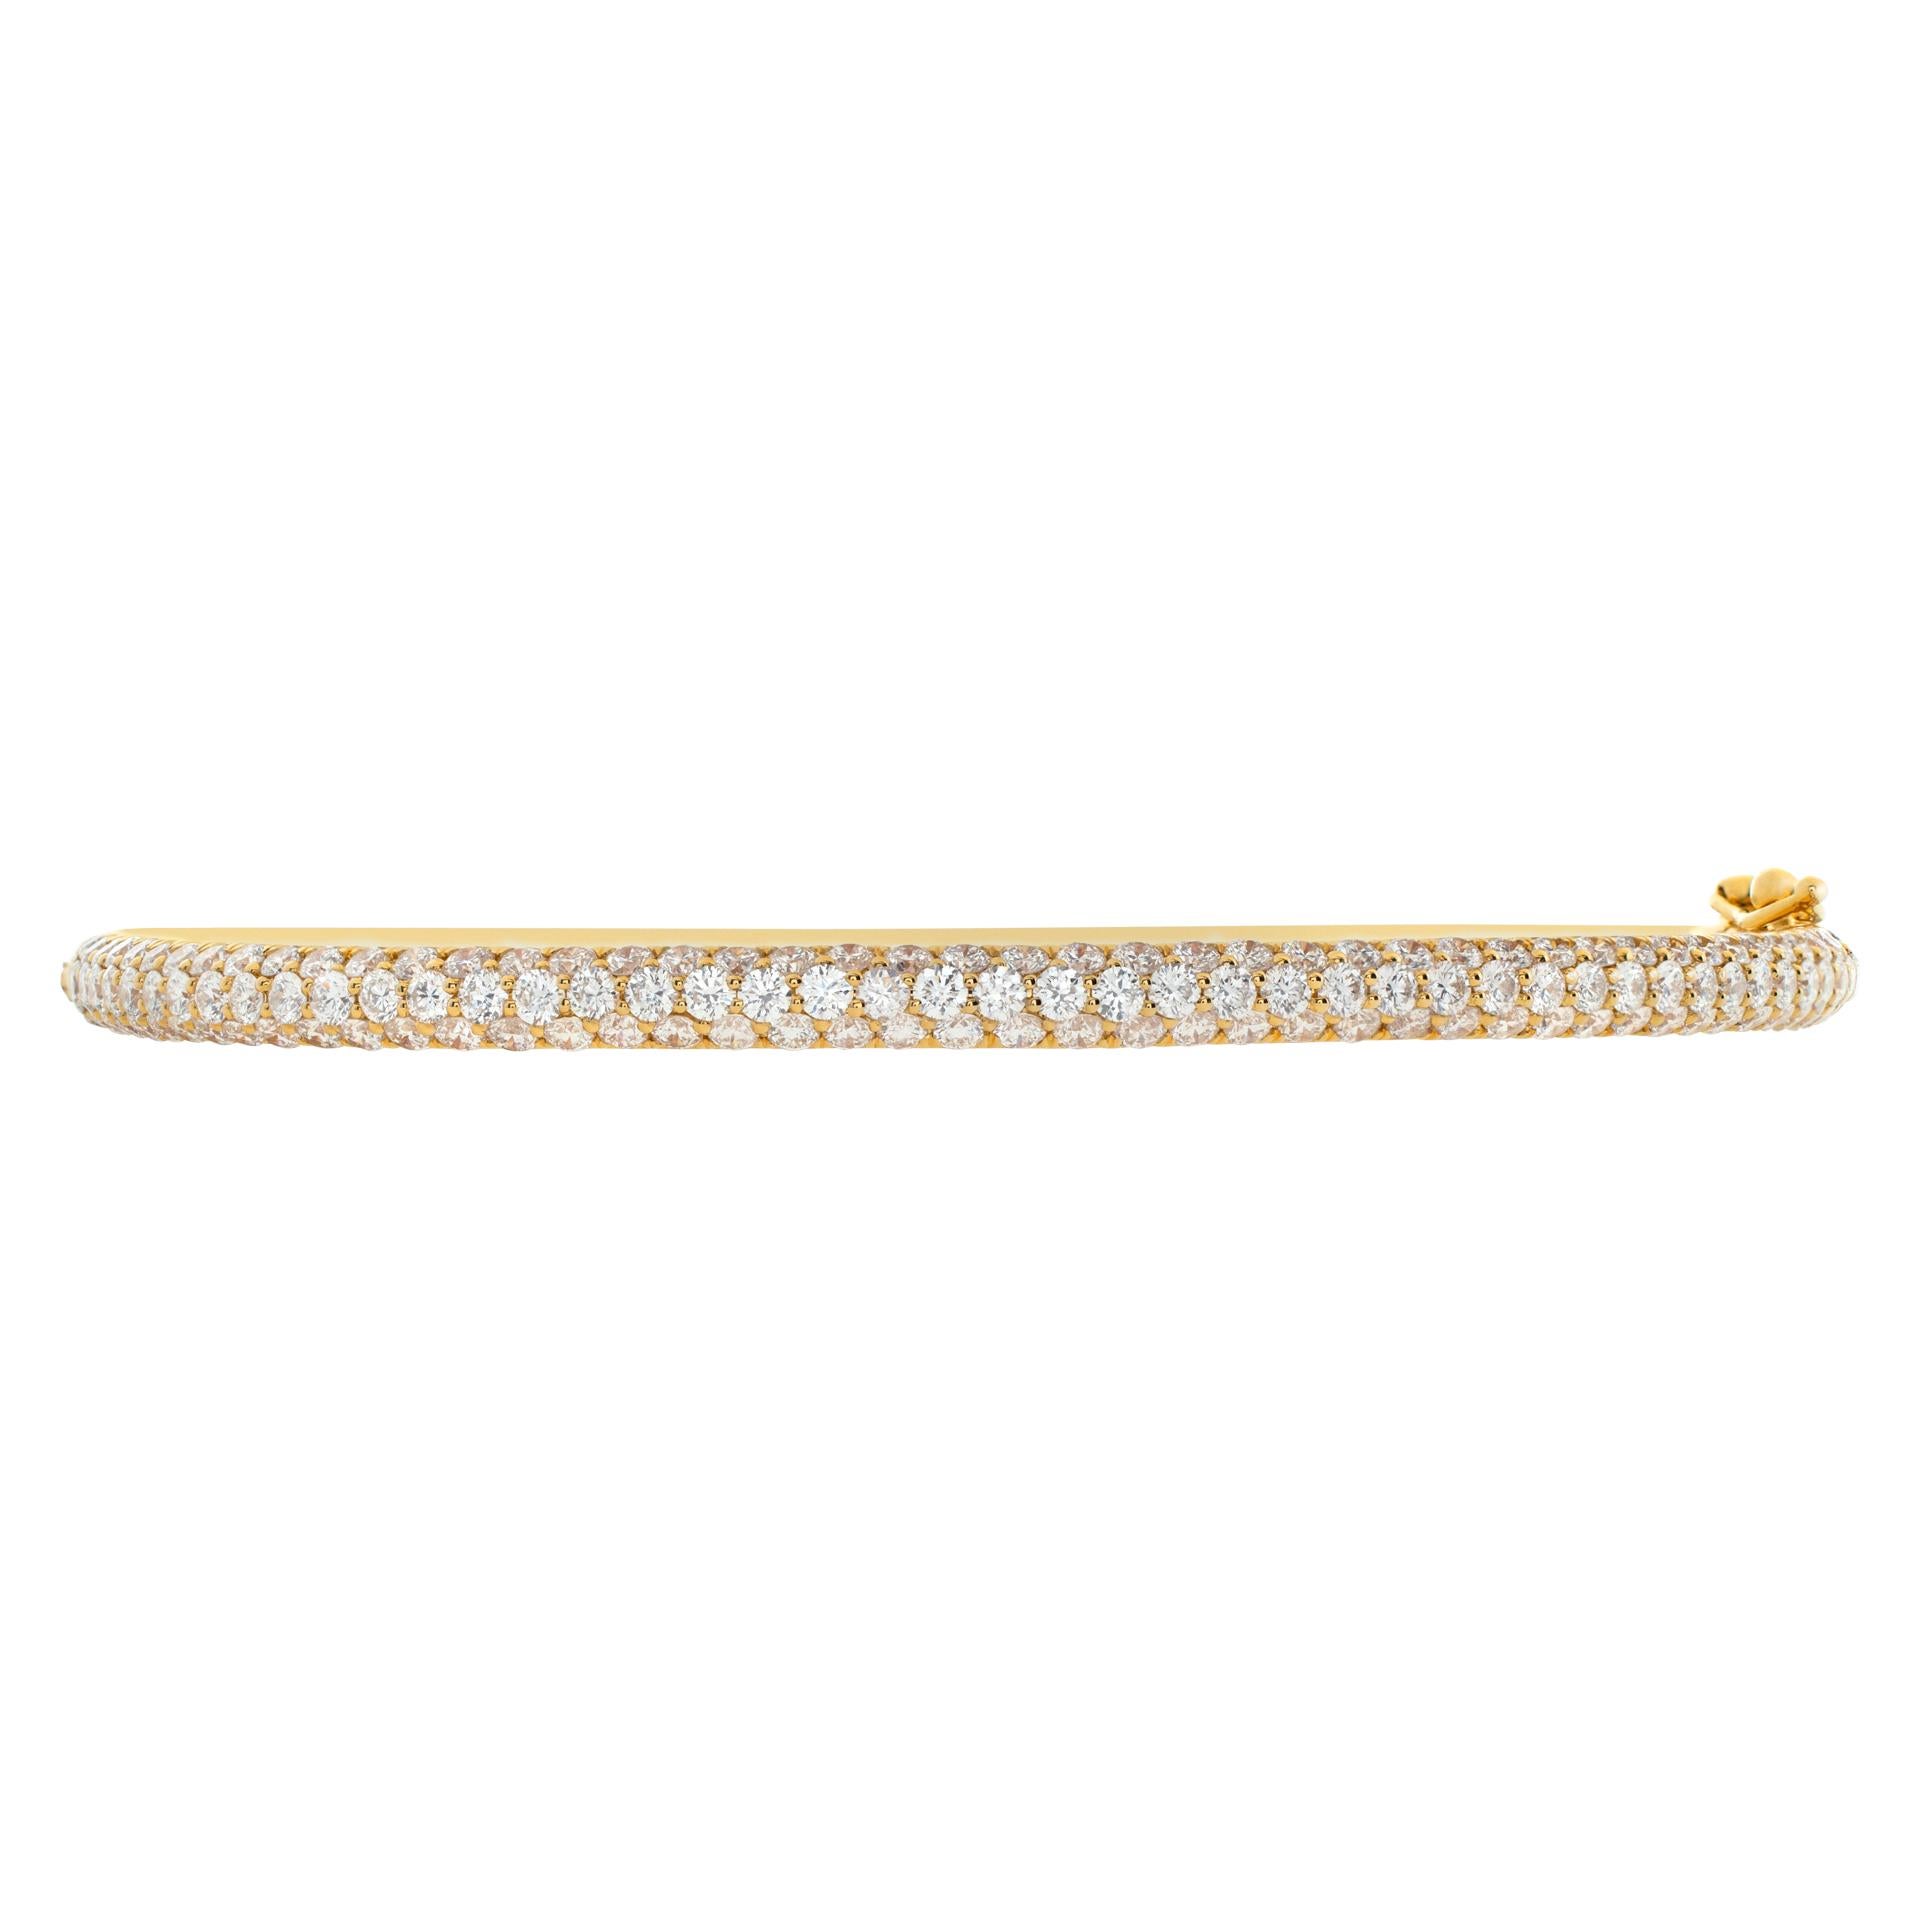 Timeless semi-eternity pave diamond bangle with 2.86 carats in brilliant round cut pave diamonds set in 18k yellow gold. Fits wrists up to 7.5'', width 3mm.
